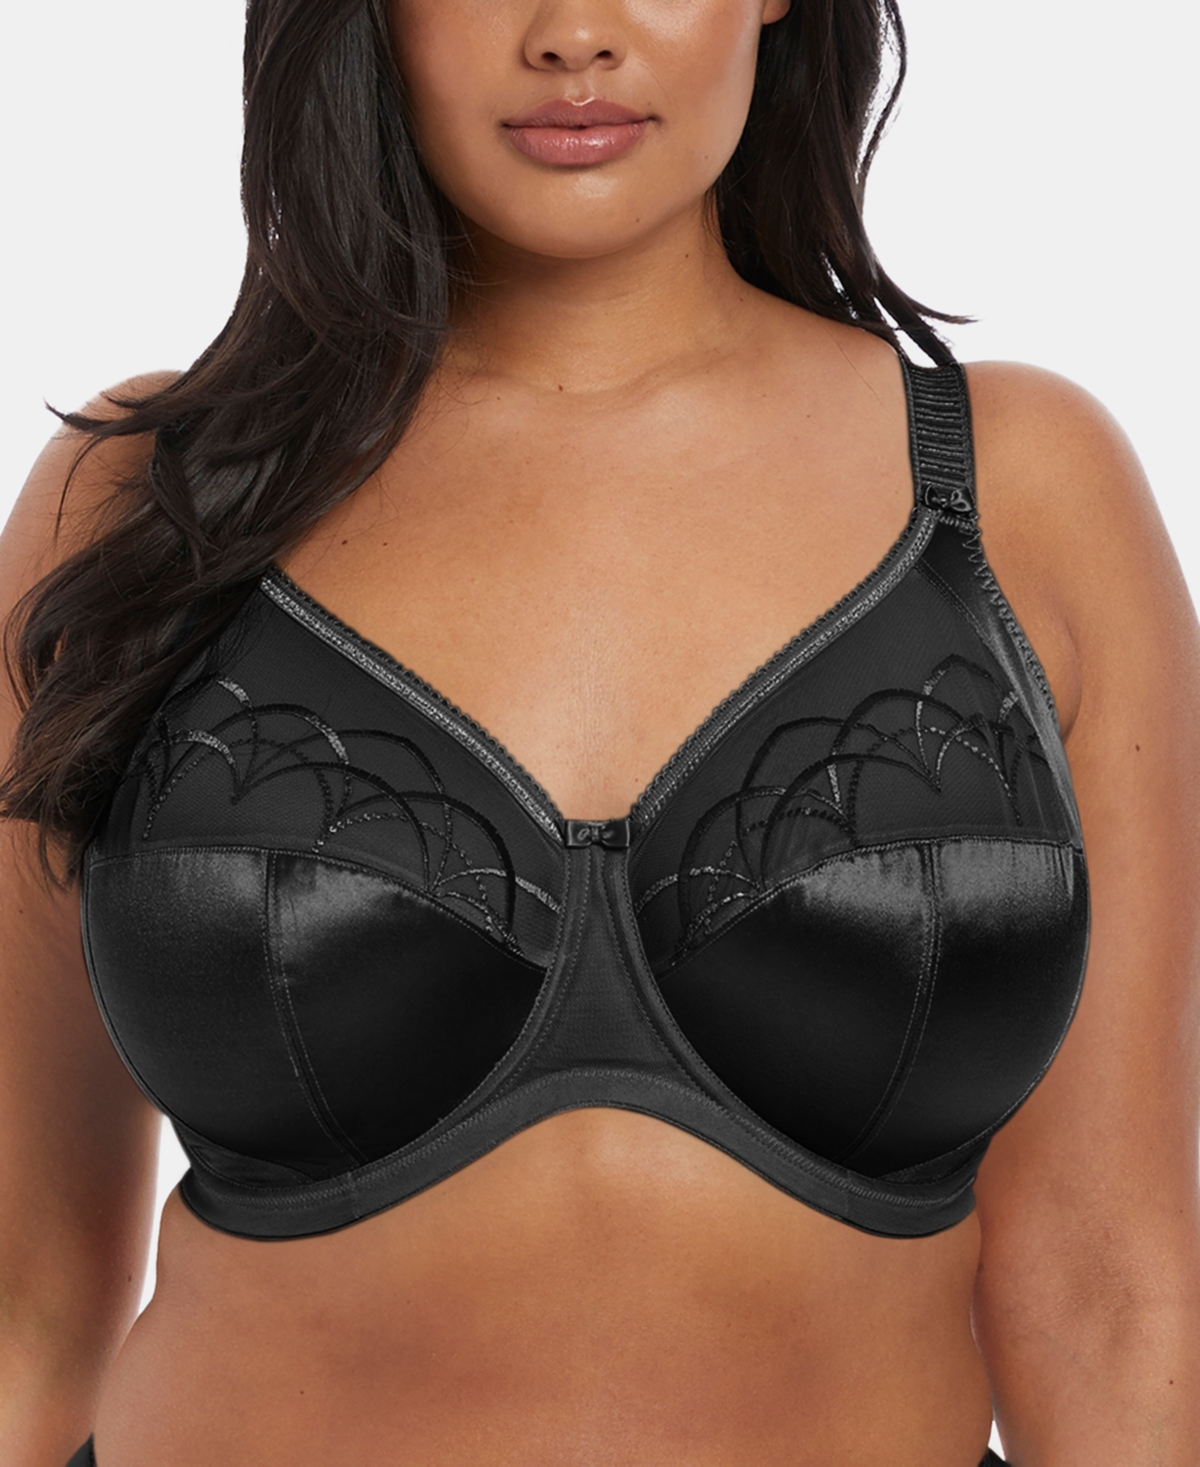 Cate Full Figure Underwire Lace Cup Bra EL4030, Online Only - Berry